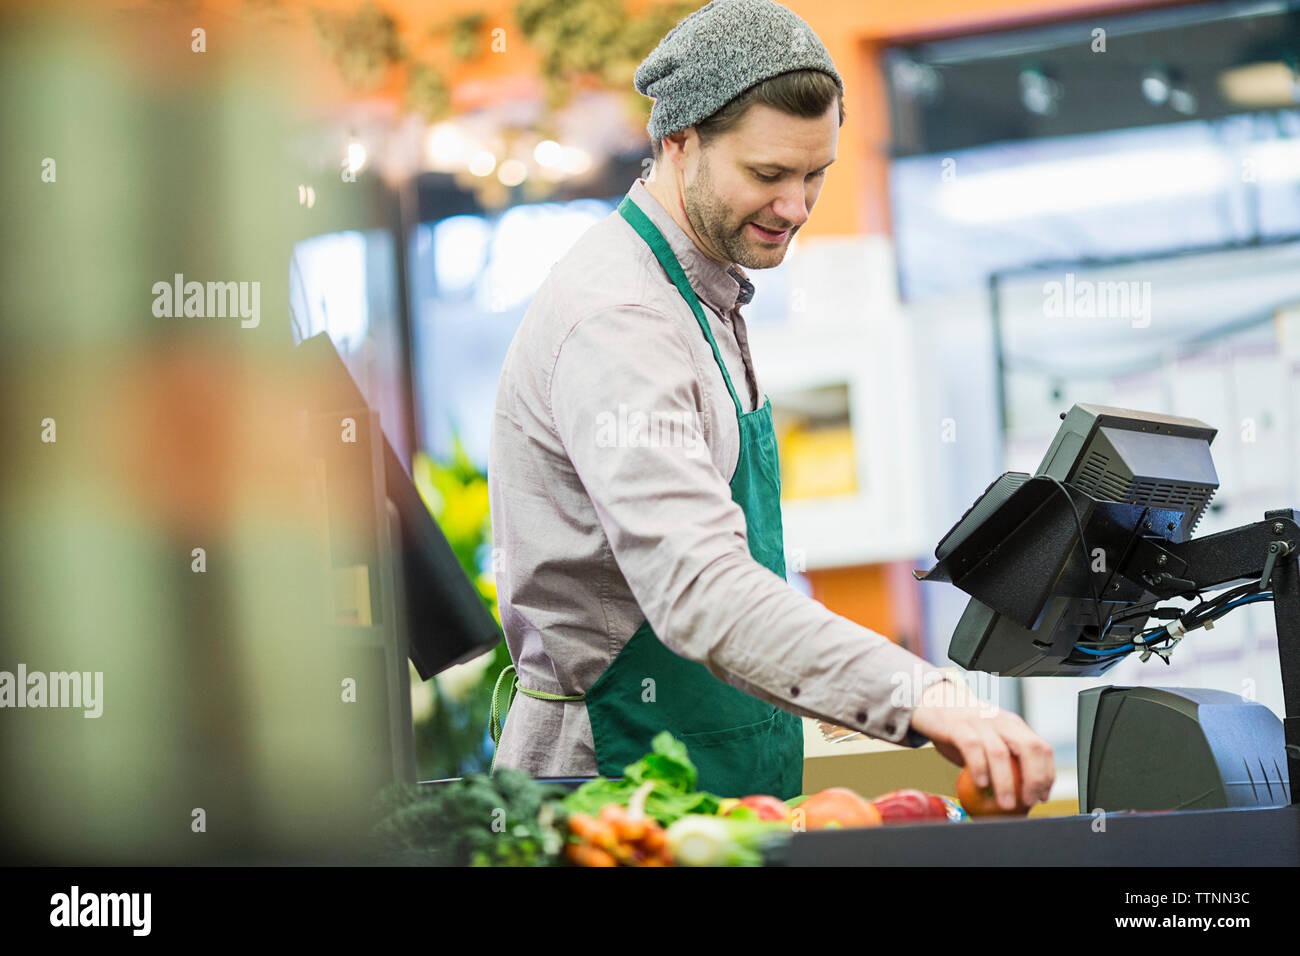 Man working while standing by counter at supermarket Stock Photo